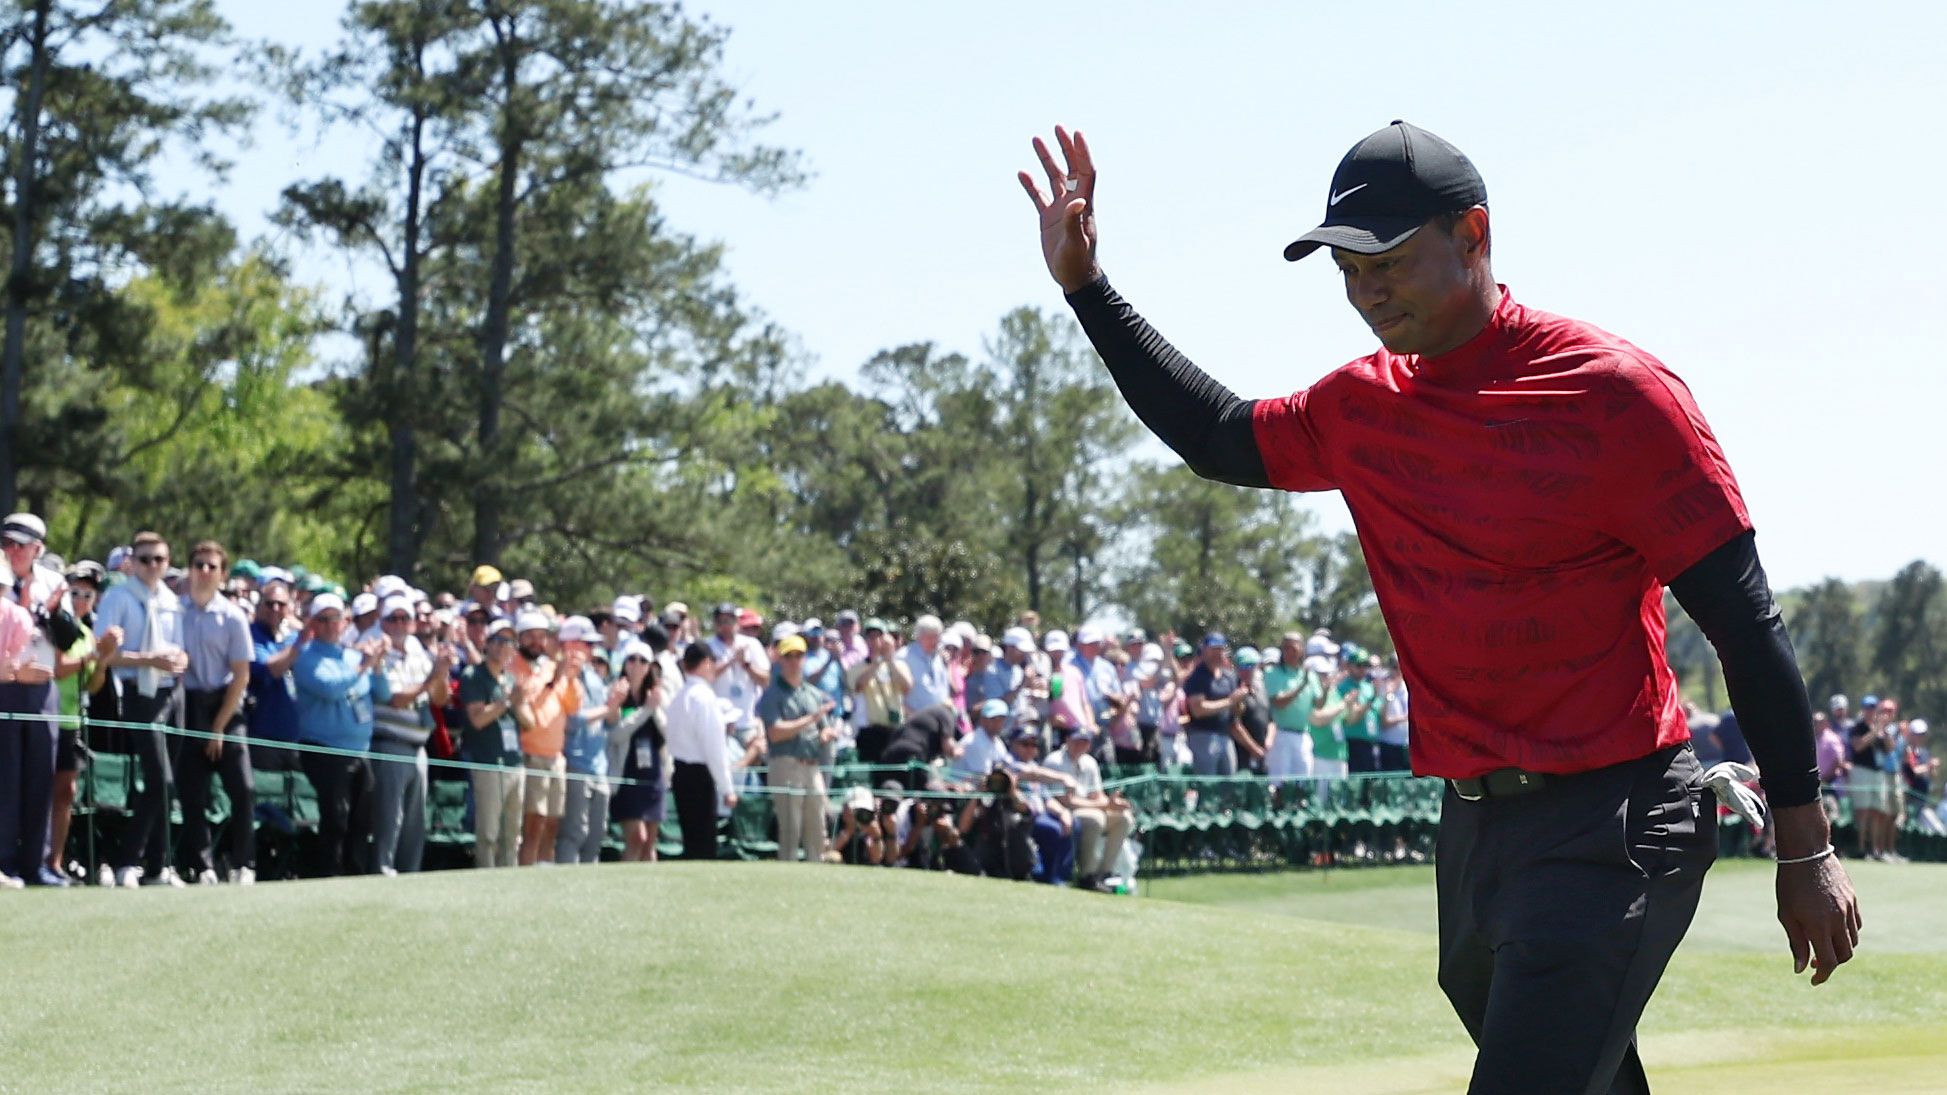 Tiger Woods waves to the crowd on the 18th green after finishing his round during the final round of the Masters.